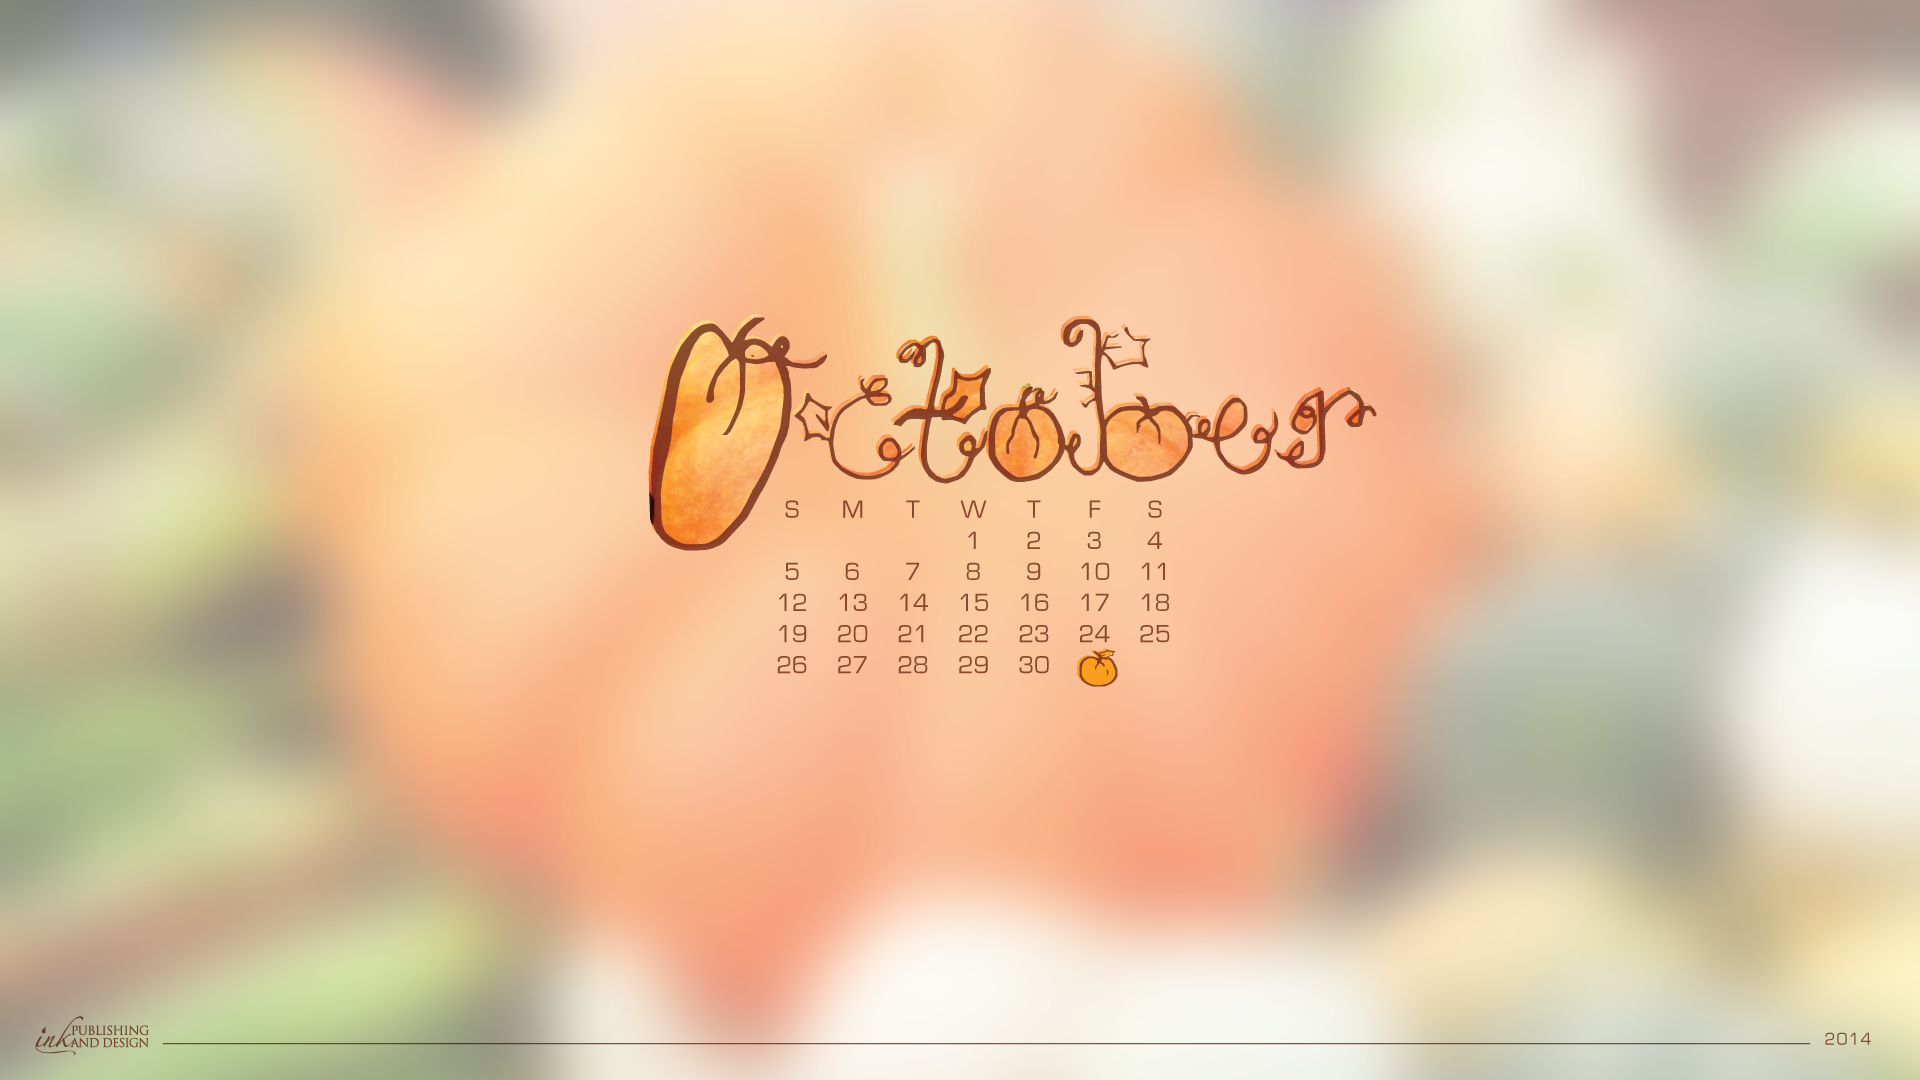 October Backgrounds For Computer - HD Wallpaper 